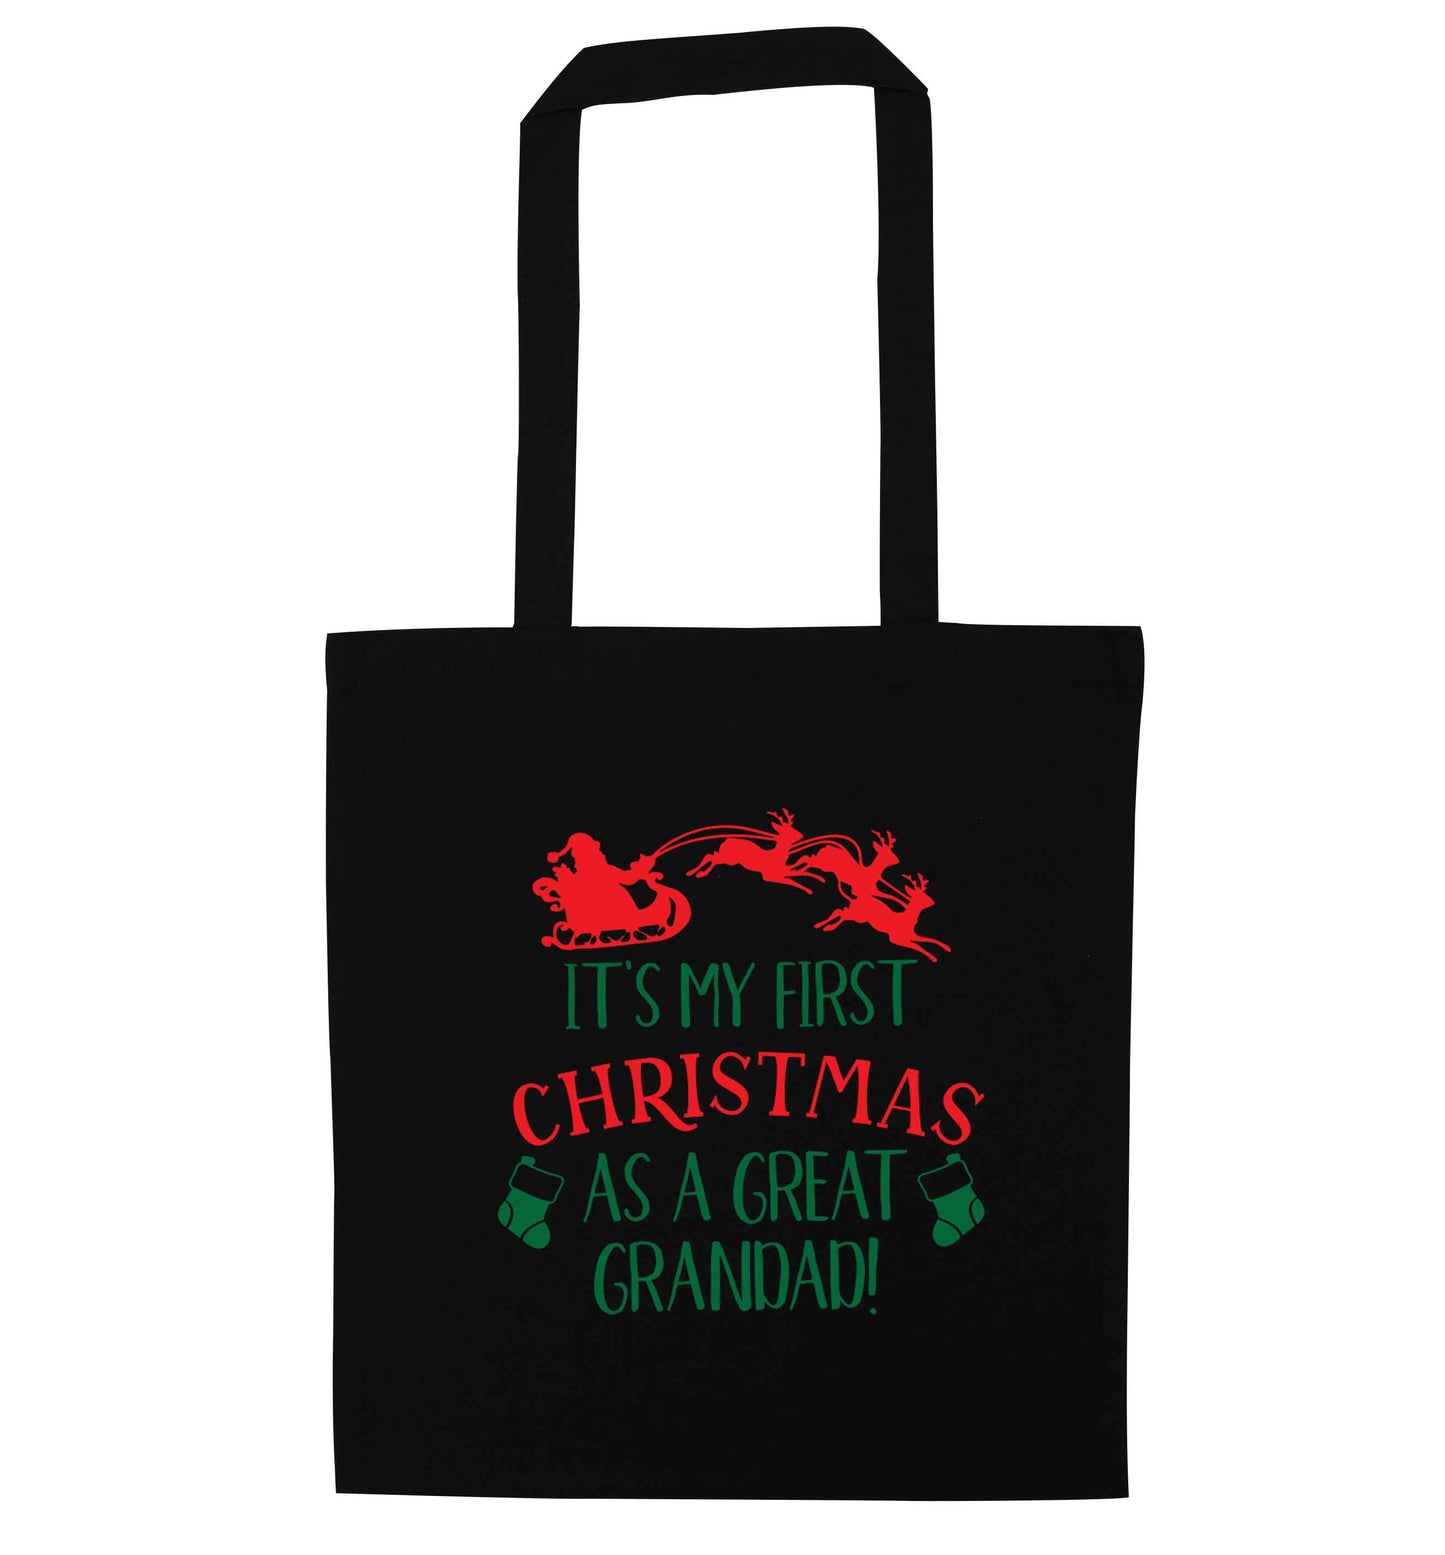 It's my first Christmas as a great grandad! black tote bag